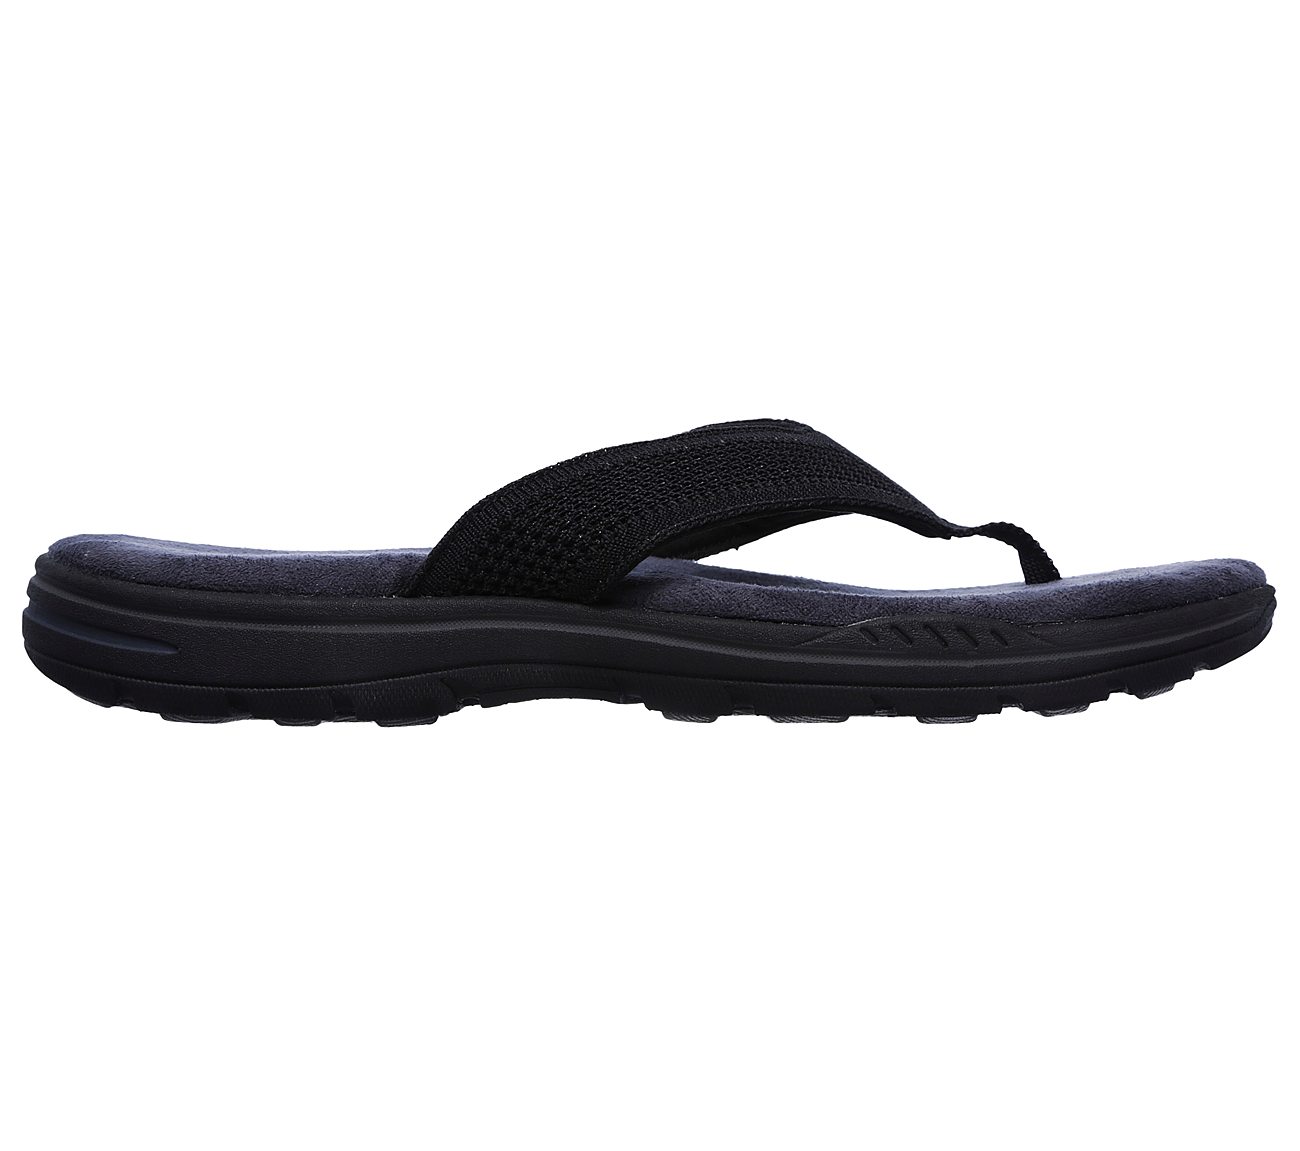 Buy SKECHERS Relaxed Fit: Evented - Borte Relaxed Fit Shoes